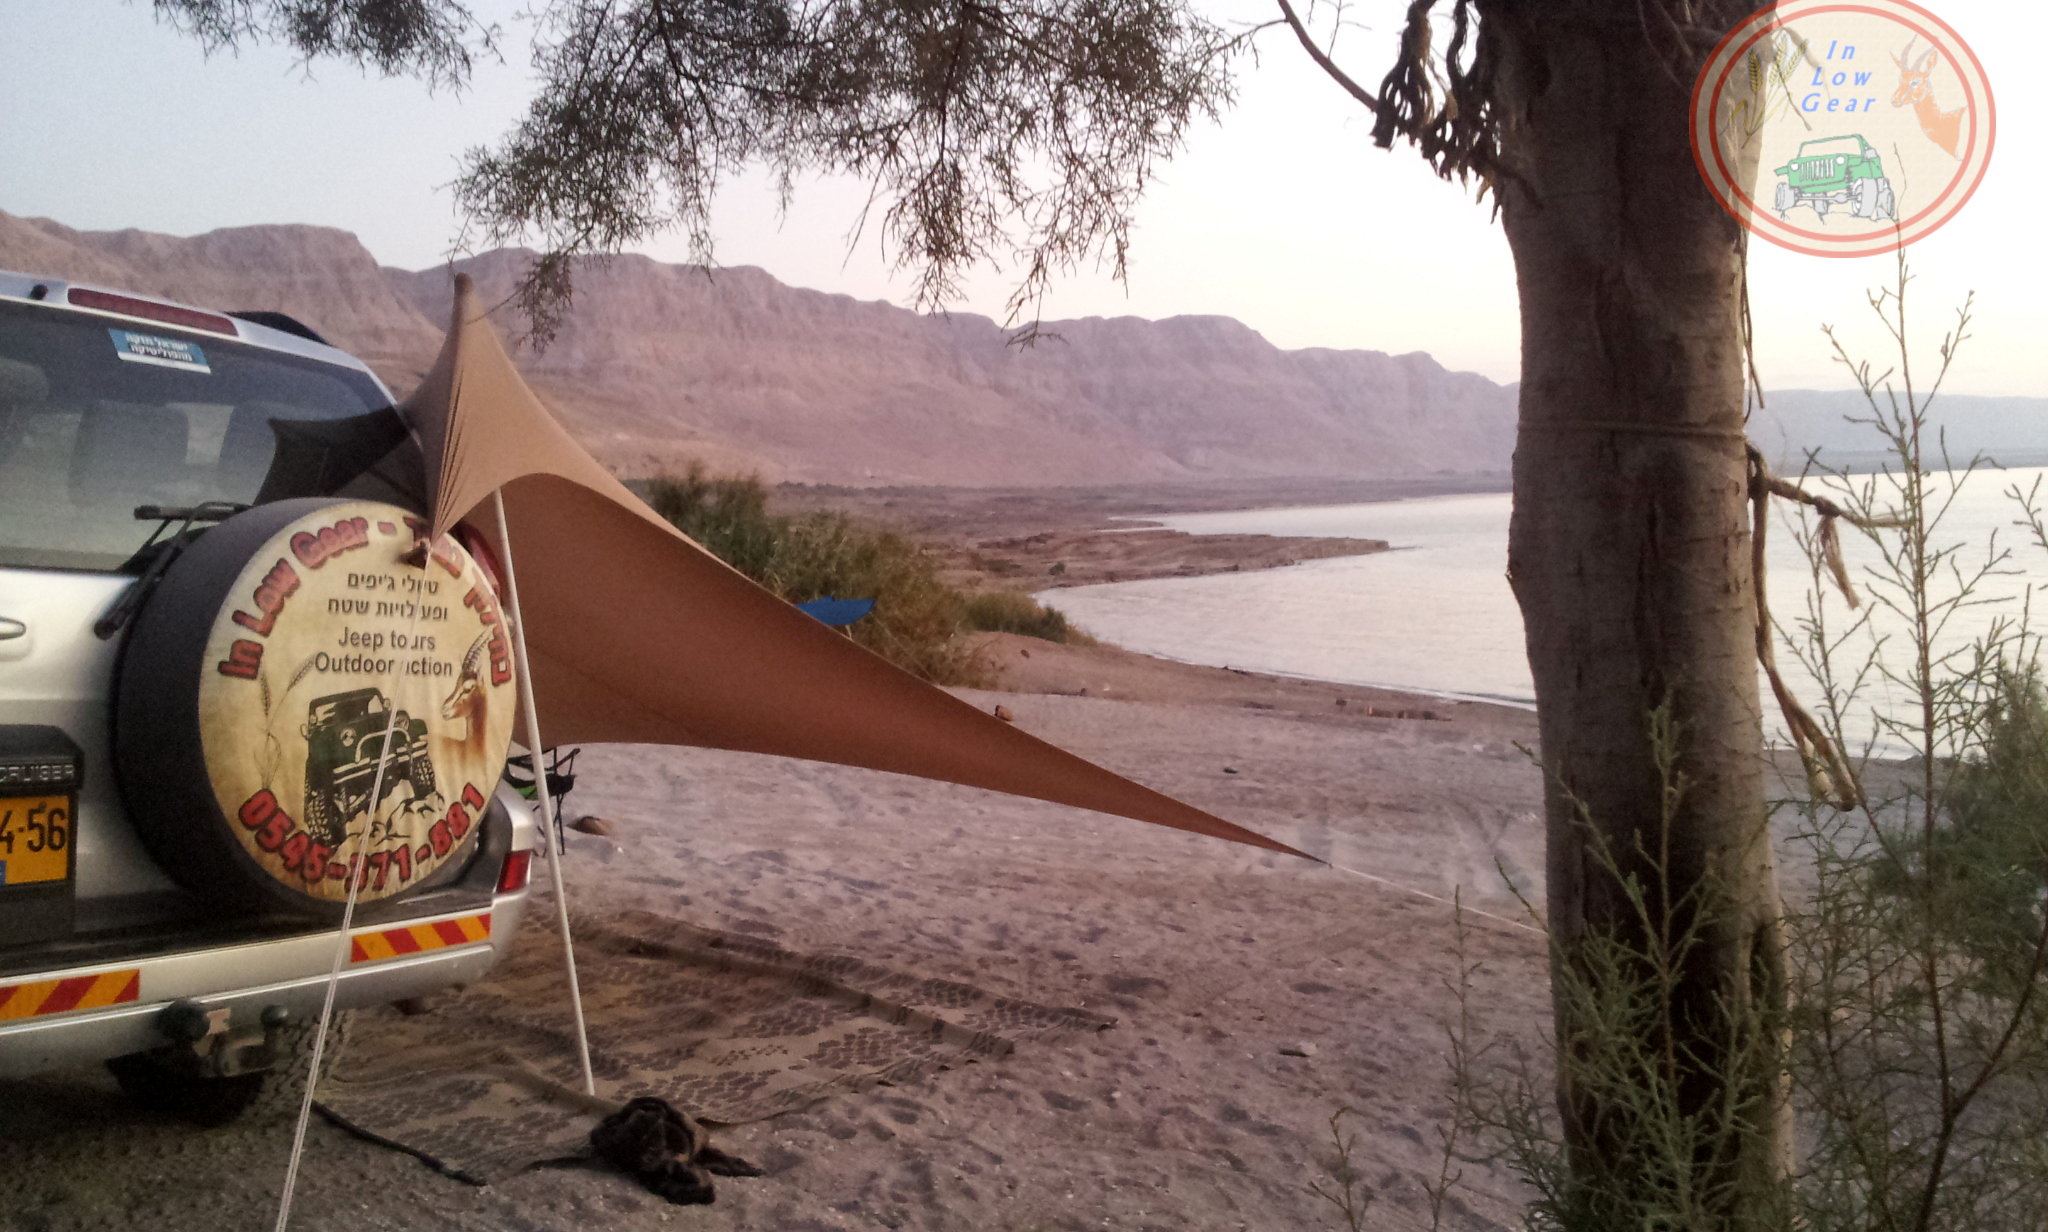 Dead Sea mud and natural beach Adventure tours 4x4 jeep tours